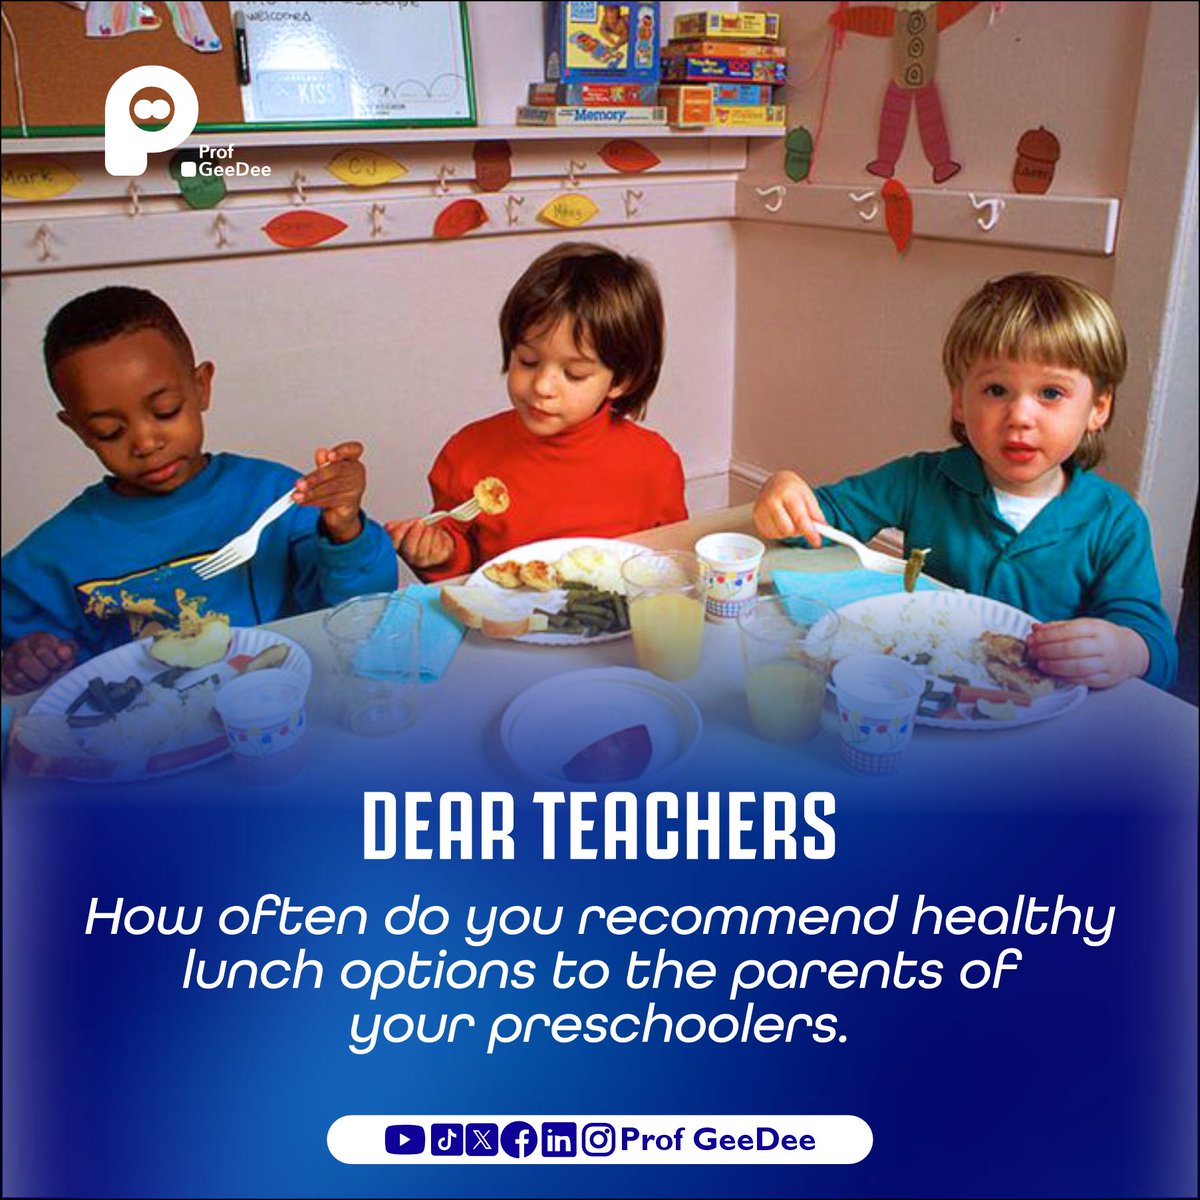 Teachers can recommend healthy lunch options to parents of preschoolers when necessary.

Healthy eating for their children can improve in their growth and development .

#earlyyears
#earlylearning
#earlychildhoodeducation
#dearteachersseries
#profgeedee